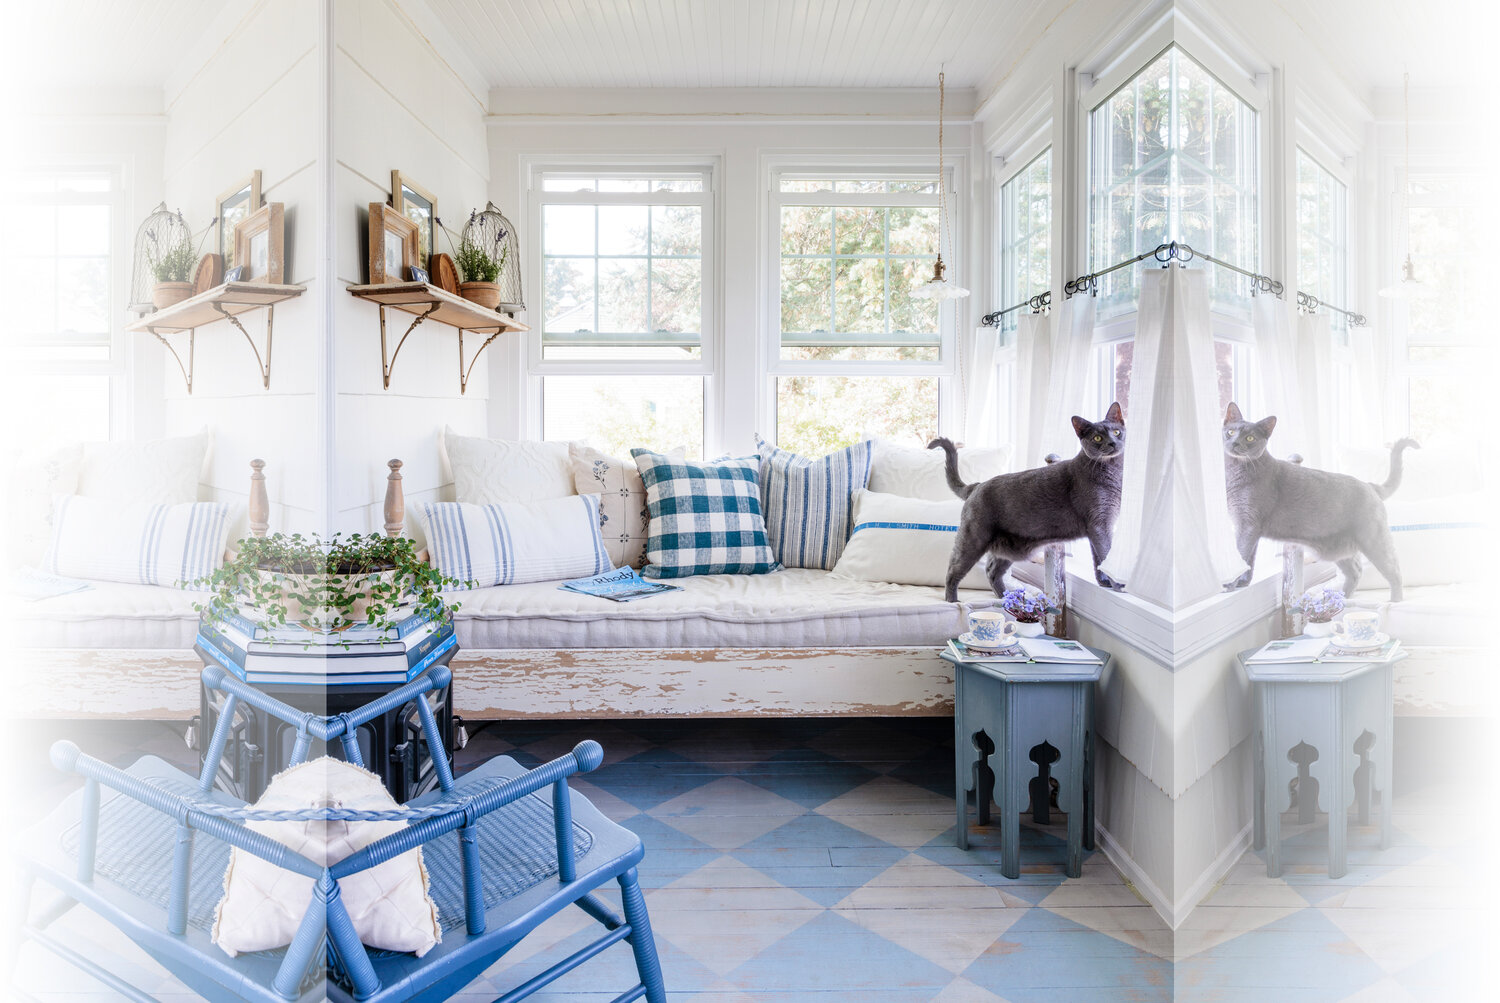 Kinghorn painted the porch floor, table, and rocking chair in her favorite blue hues. The vintage pillows/cushions continue the classic color palette